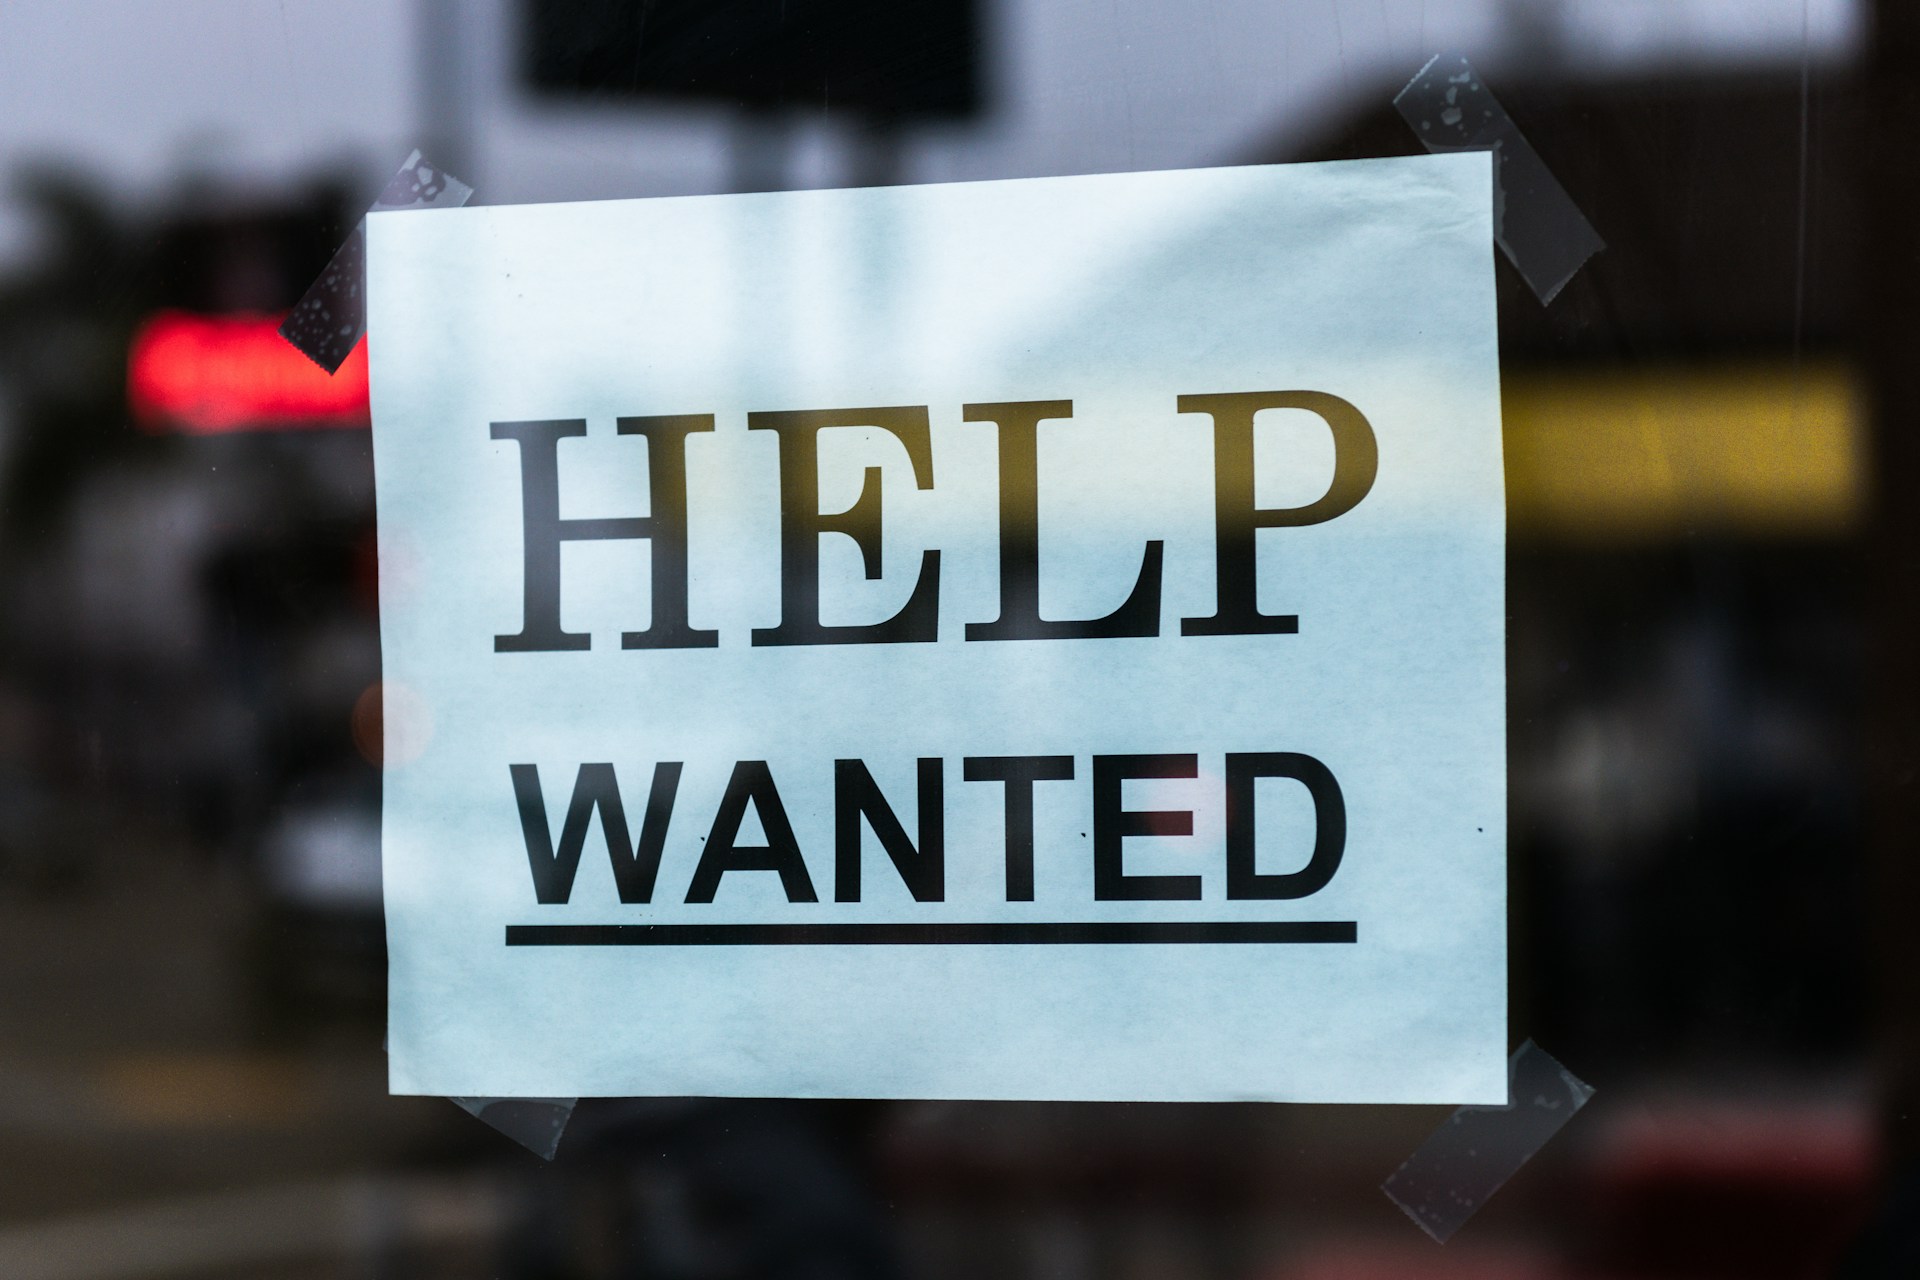 Image shows a help wanted sign to illustrate tips to publish your self-help book